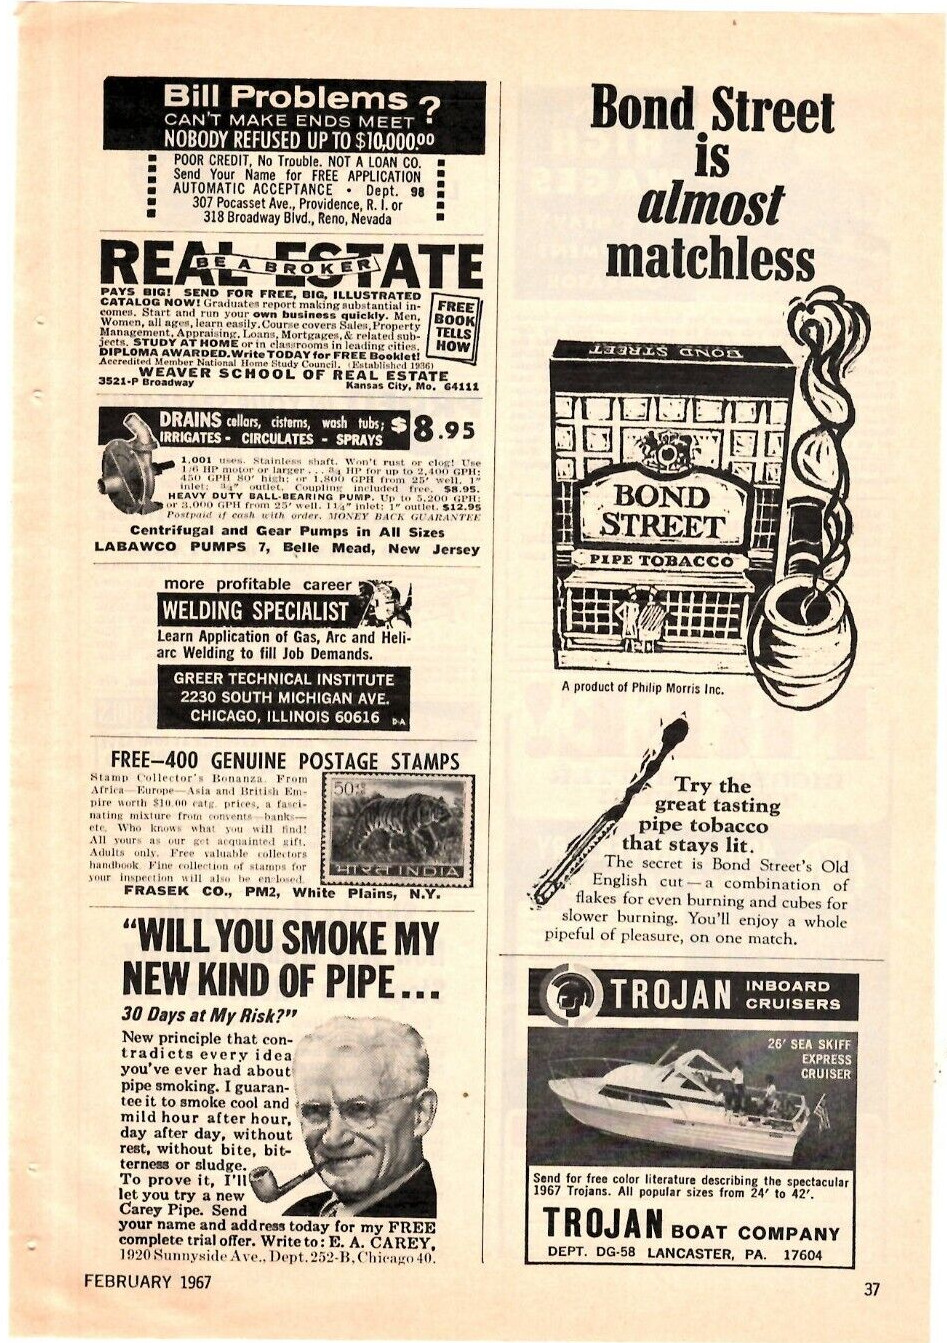 1967 Print Ad Bond Street Pipe Tobacco Is Almost Matchless Stays Lit Old English